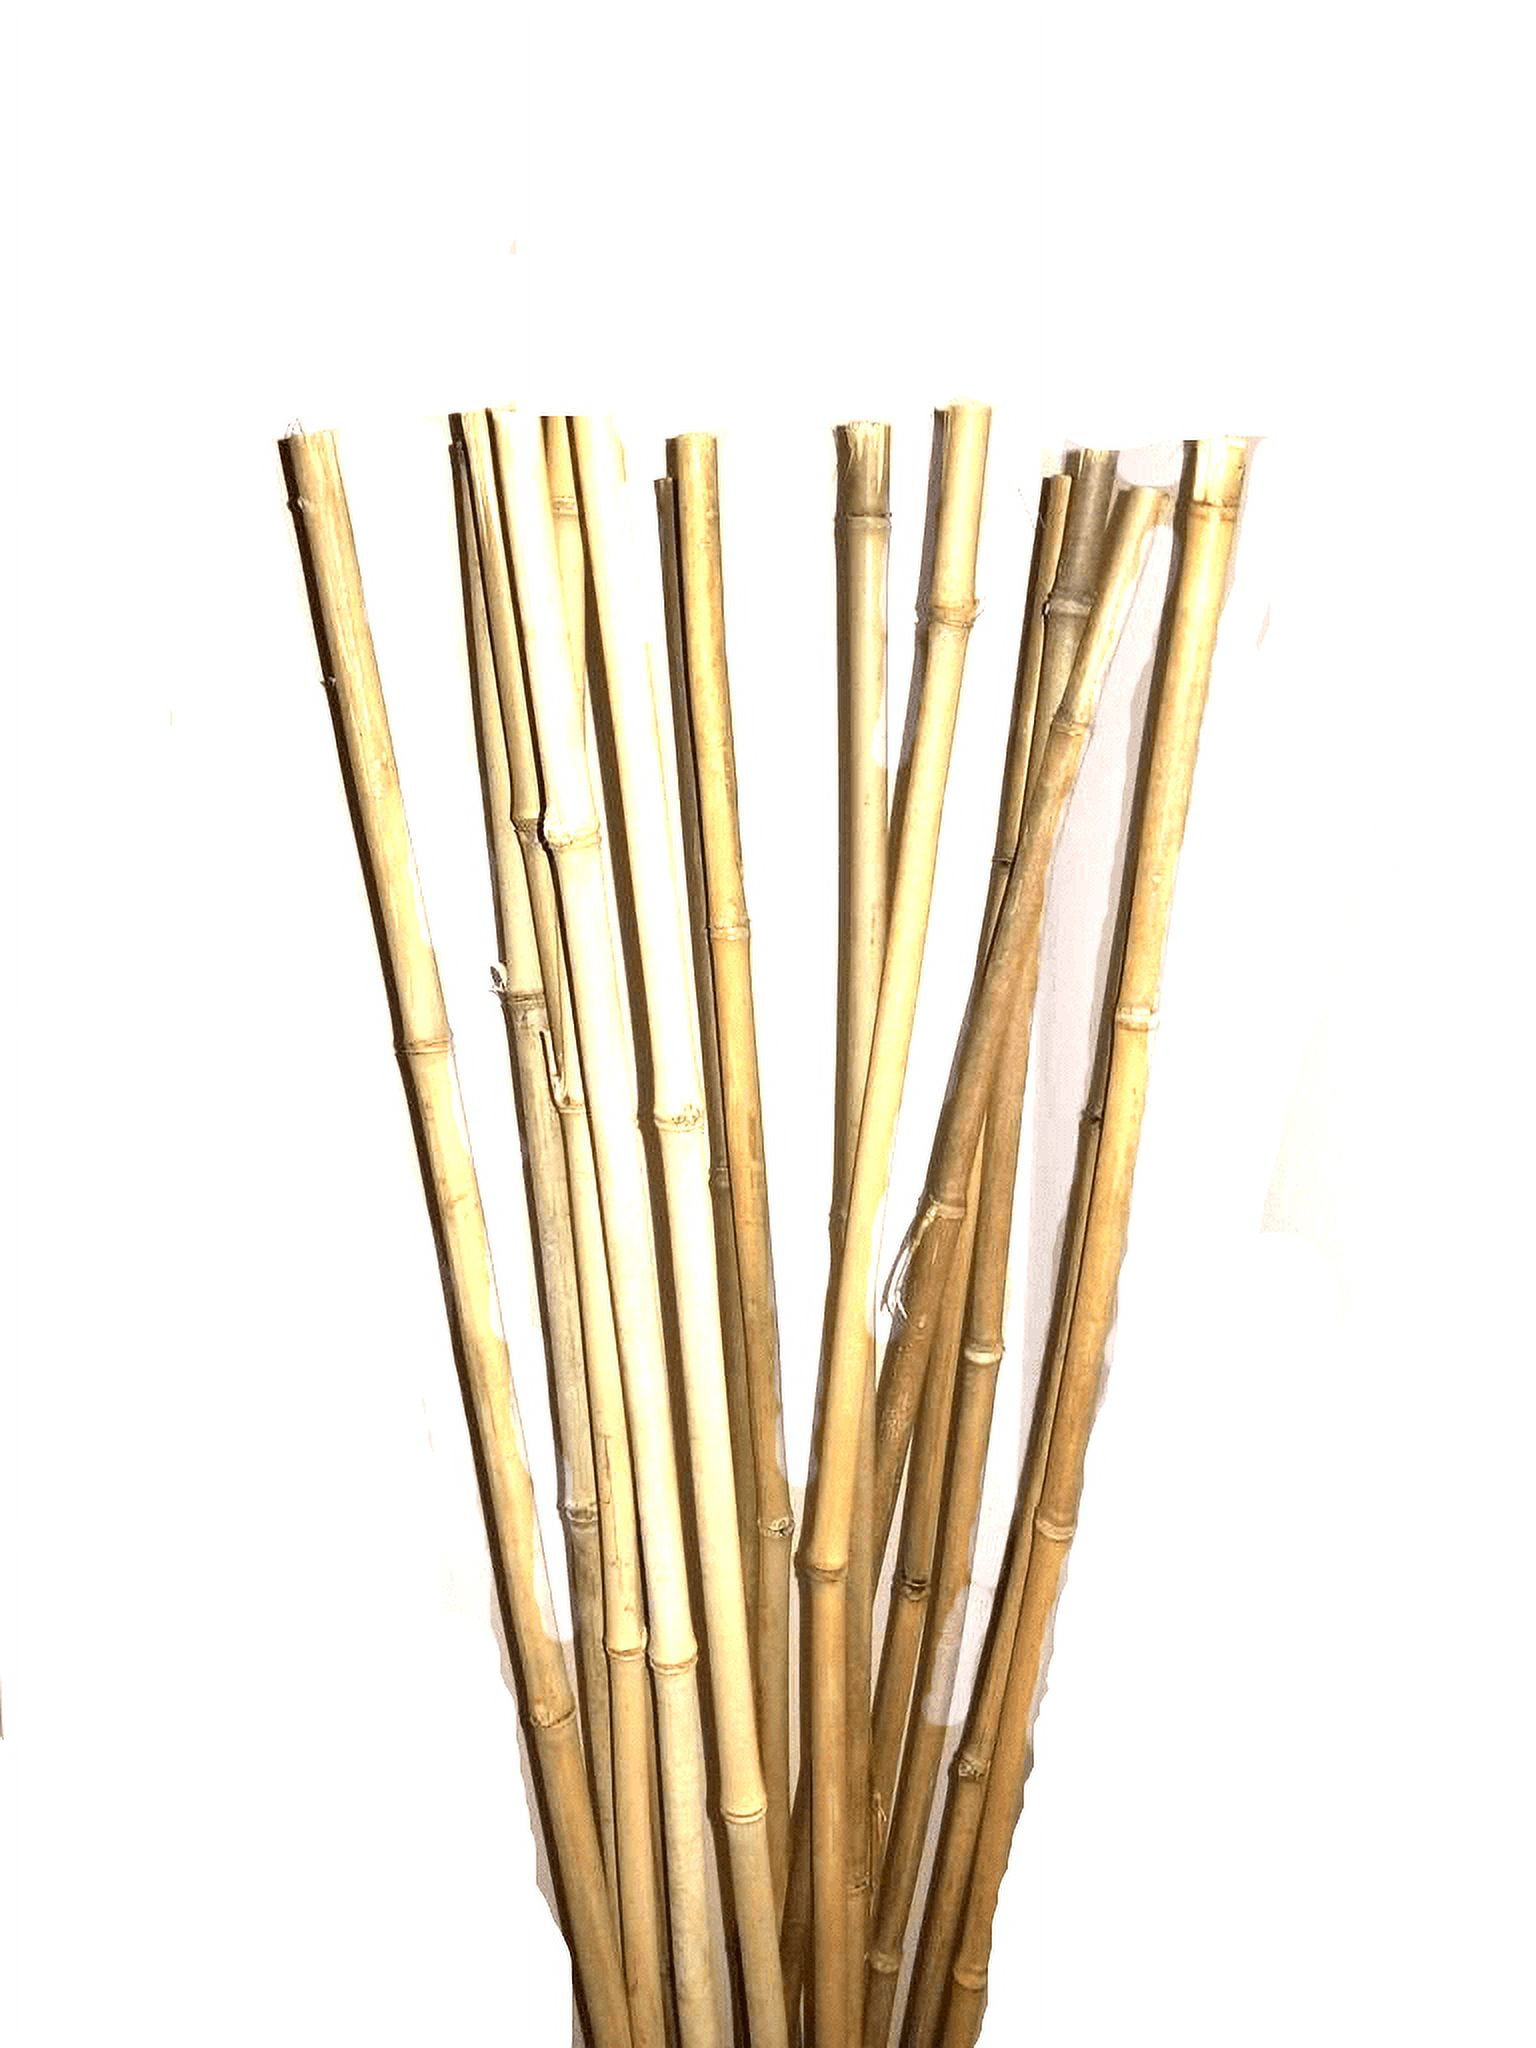 Natural THICK bamboo Stakes 5 Feet Tall About Half Inch Diameter - Pack ...